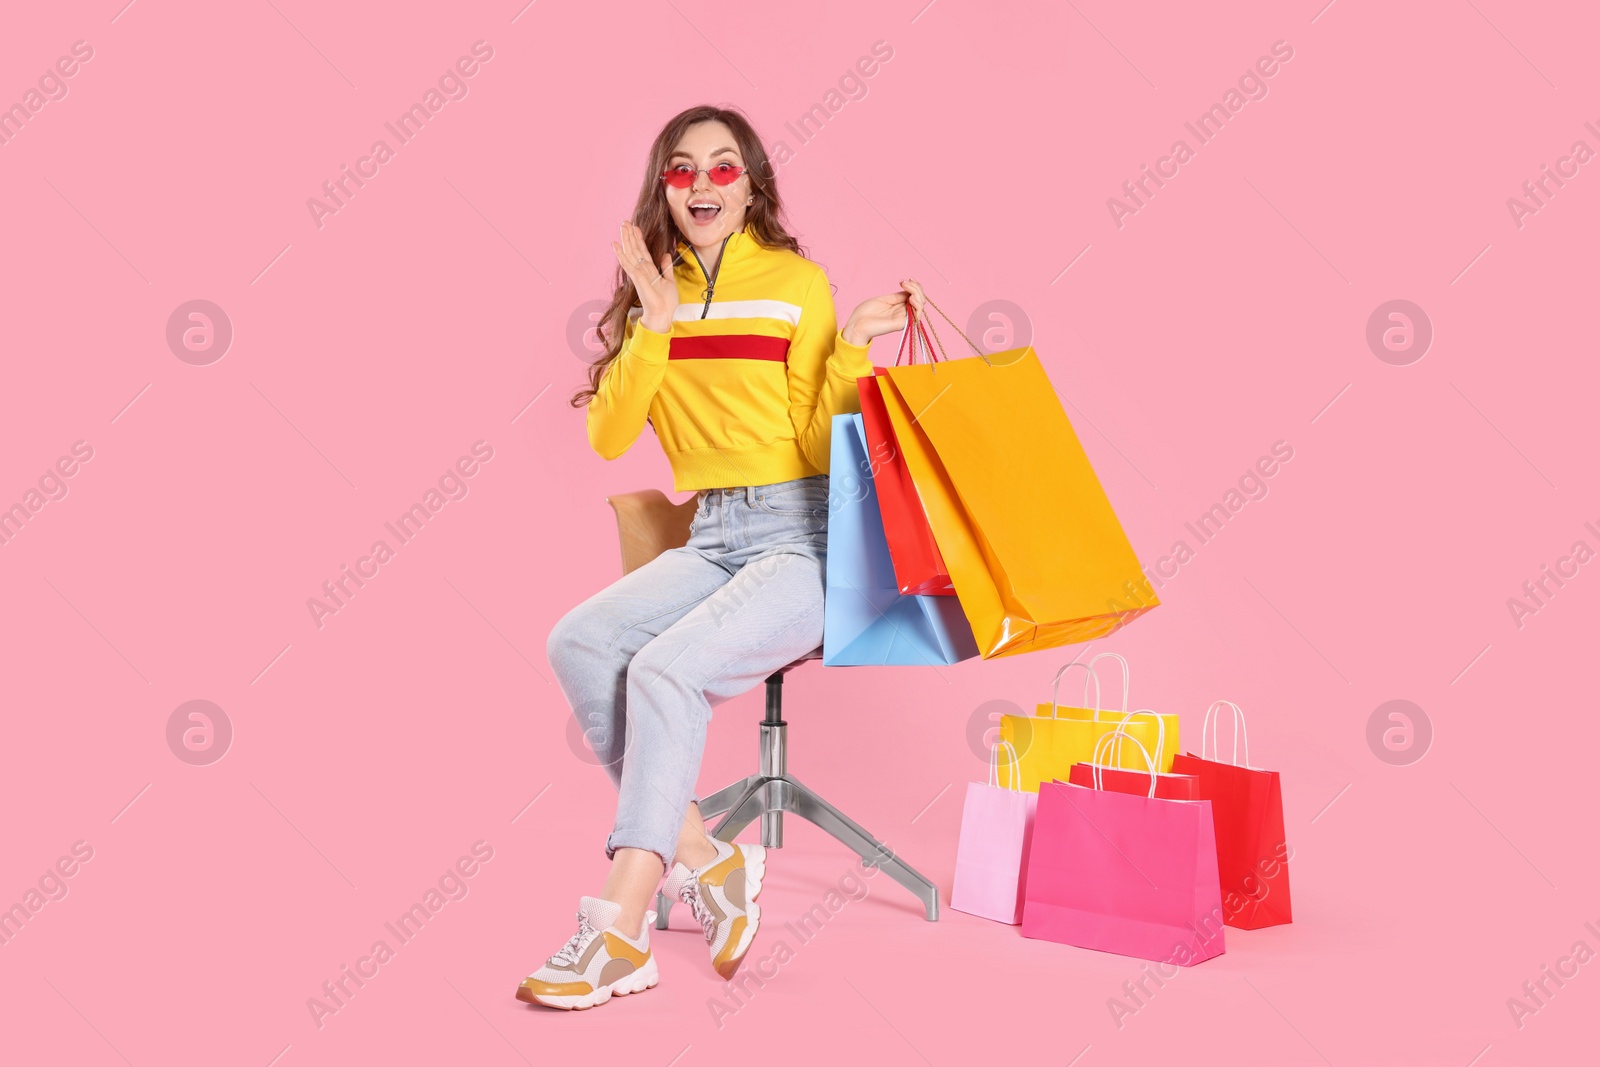 Photo of Emotional woman in stylish sunglasses holding many colorful shopping bags on armchair against pink background